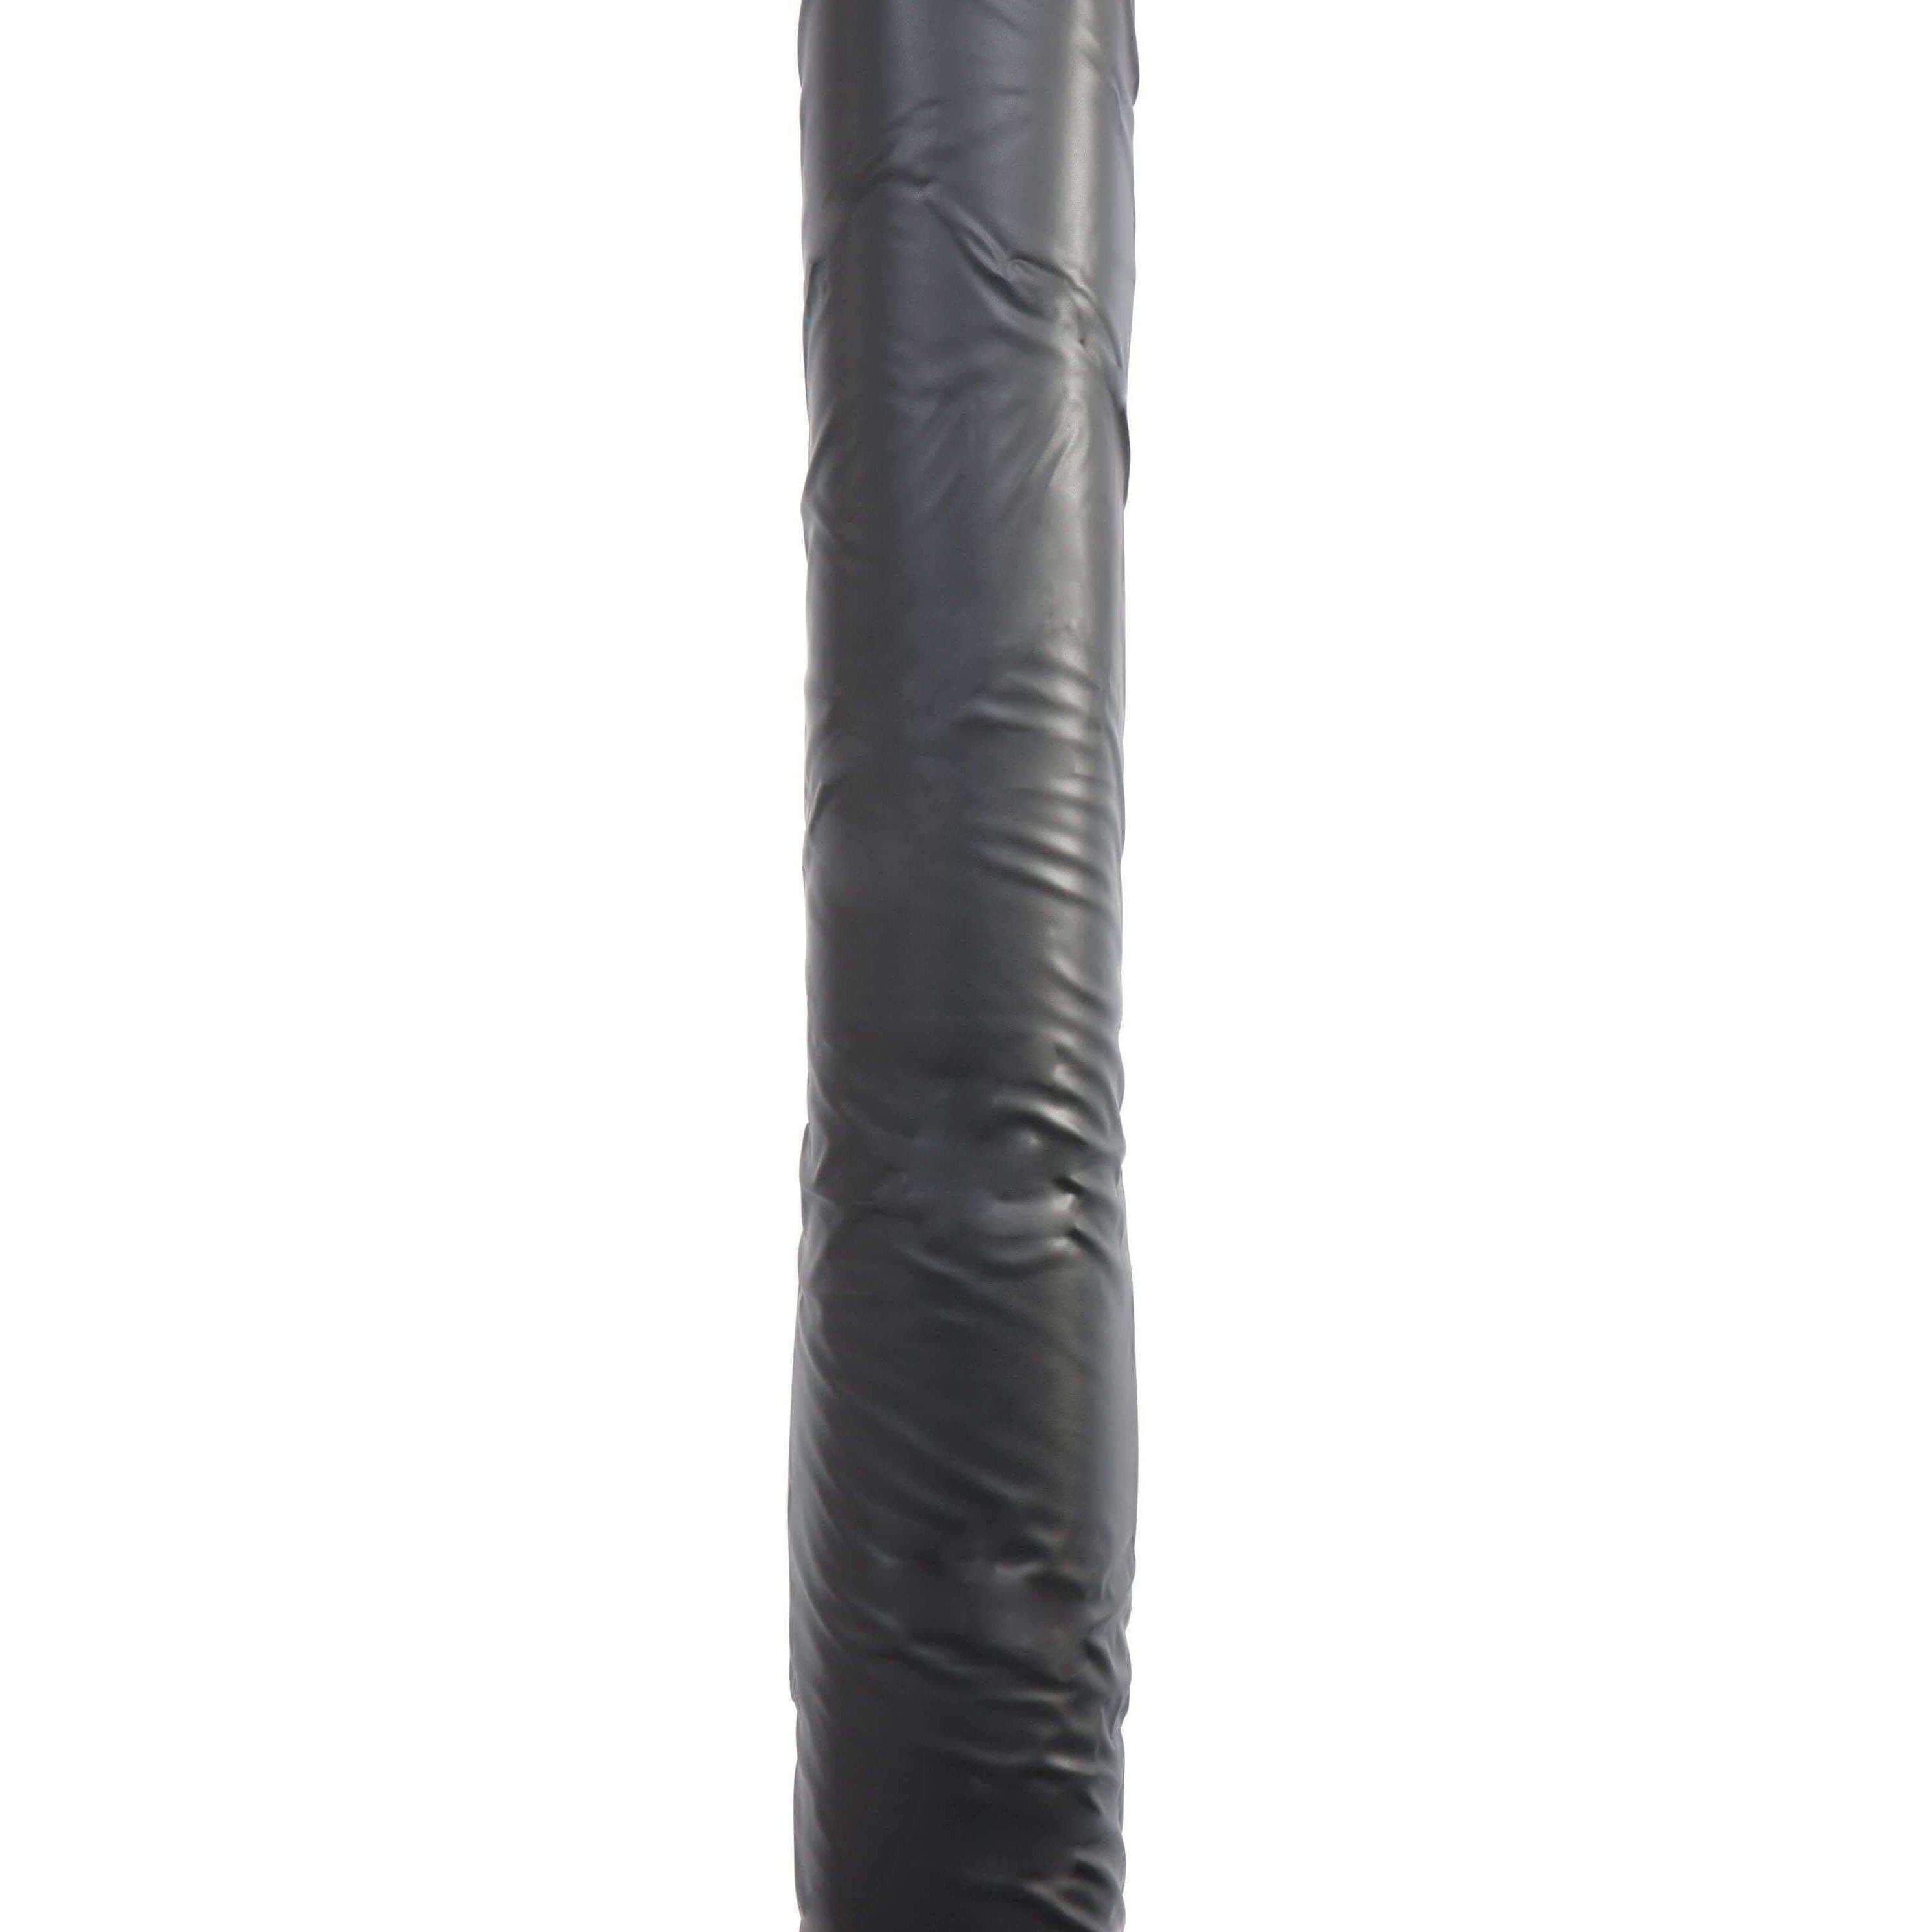 Goalsetter 16" Wrap-Around Pole Pad for 4-Inch Poles